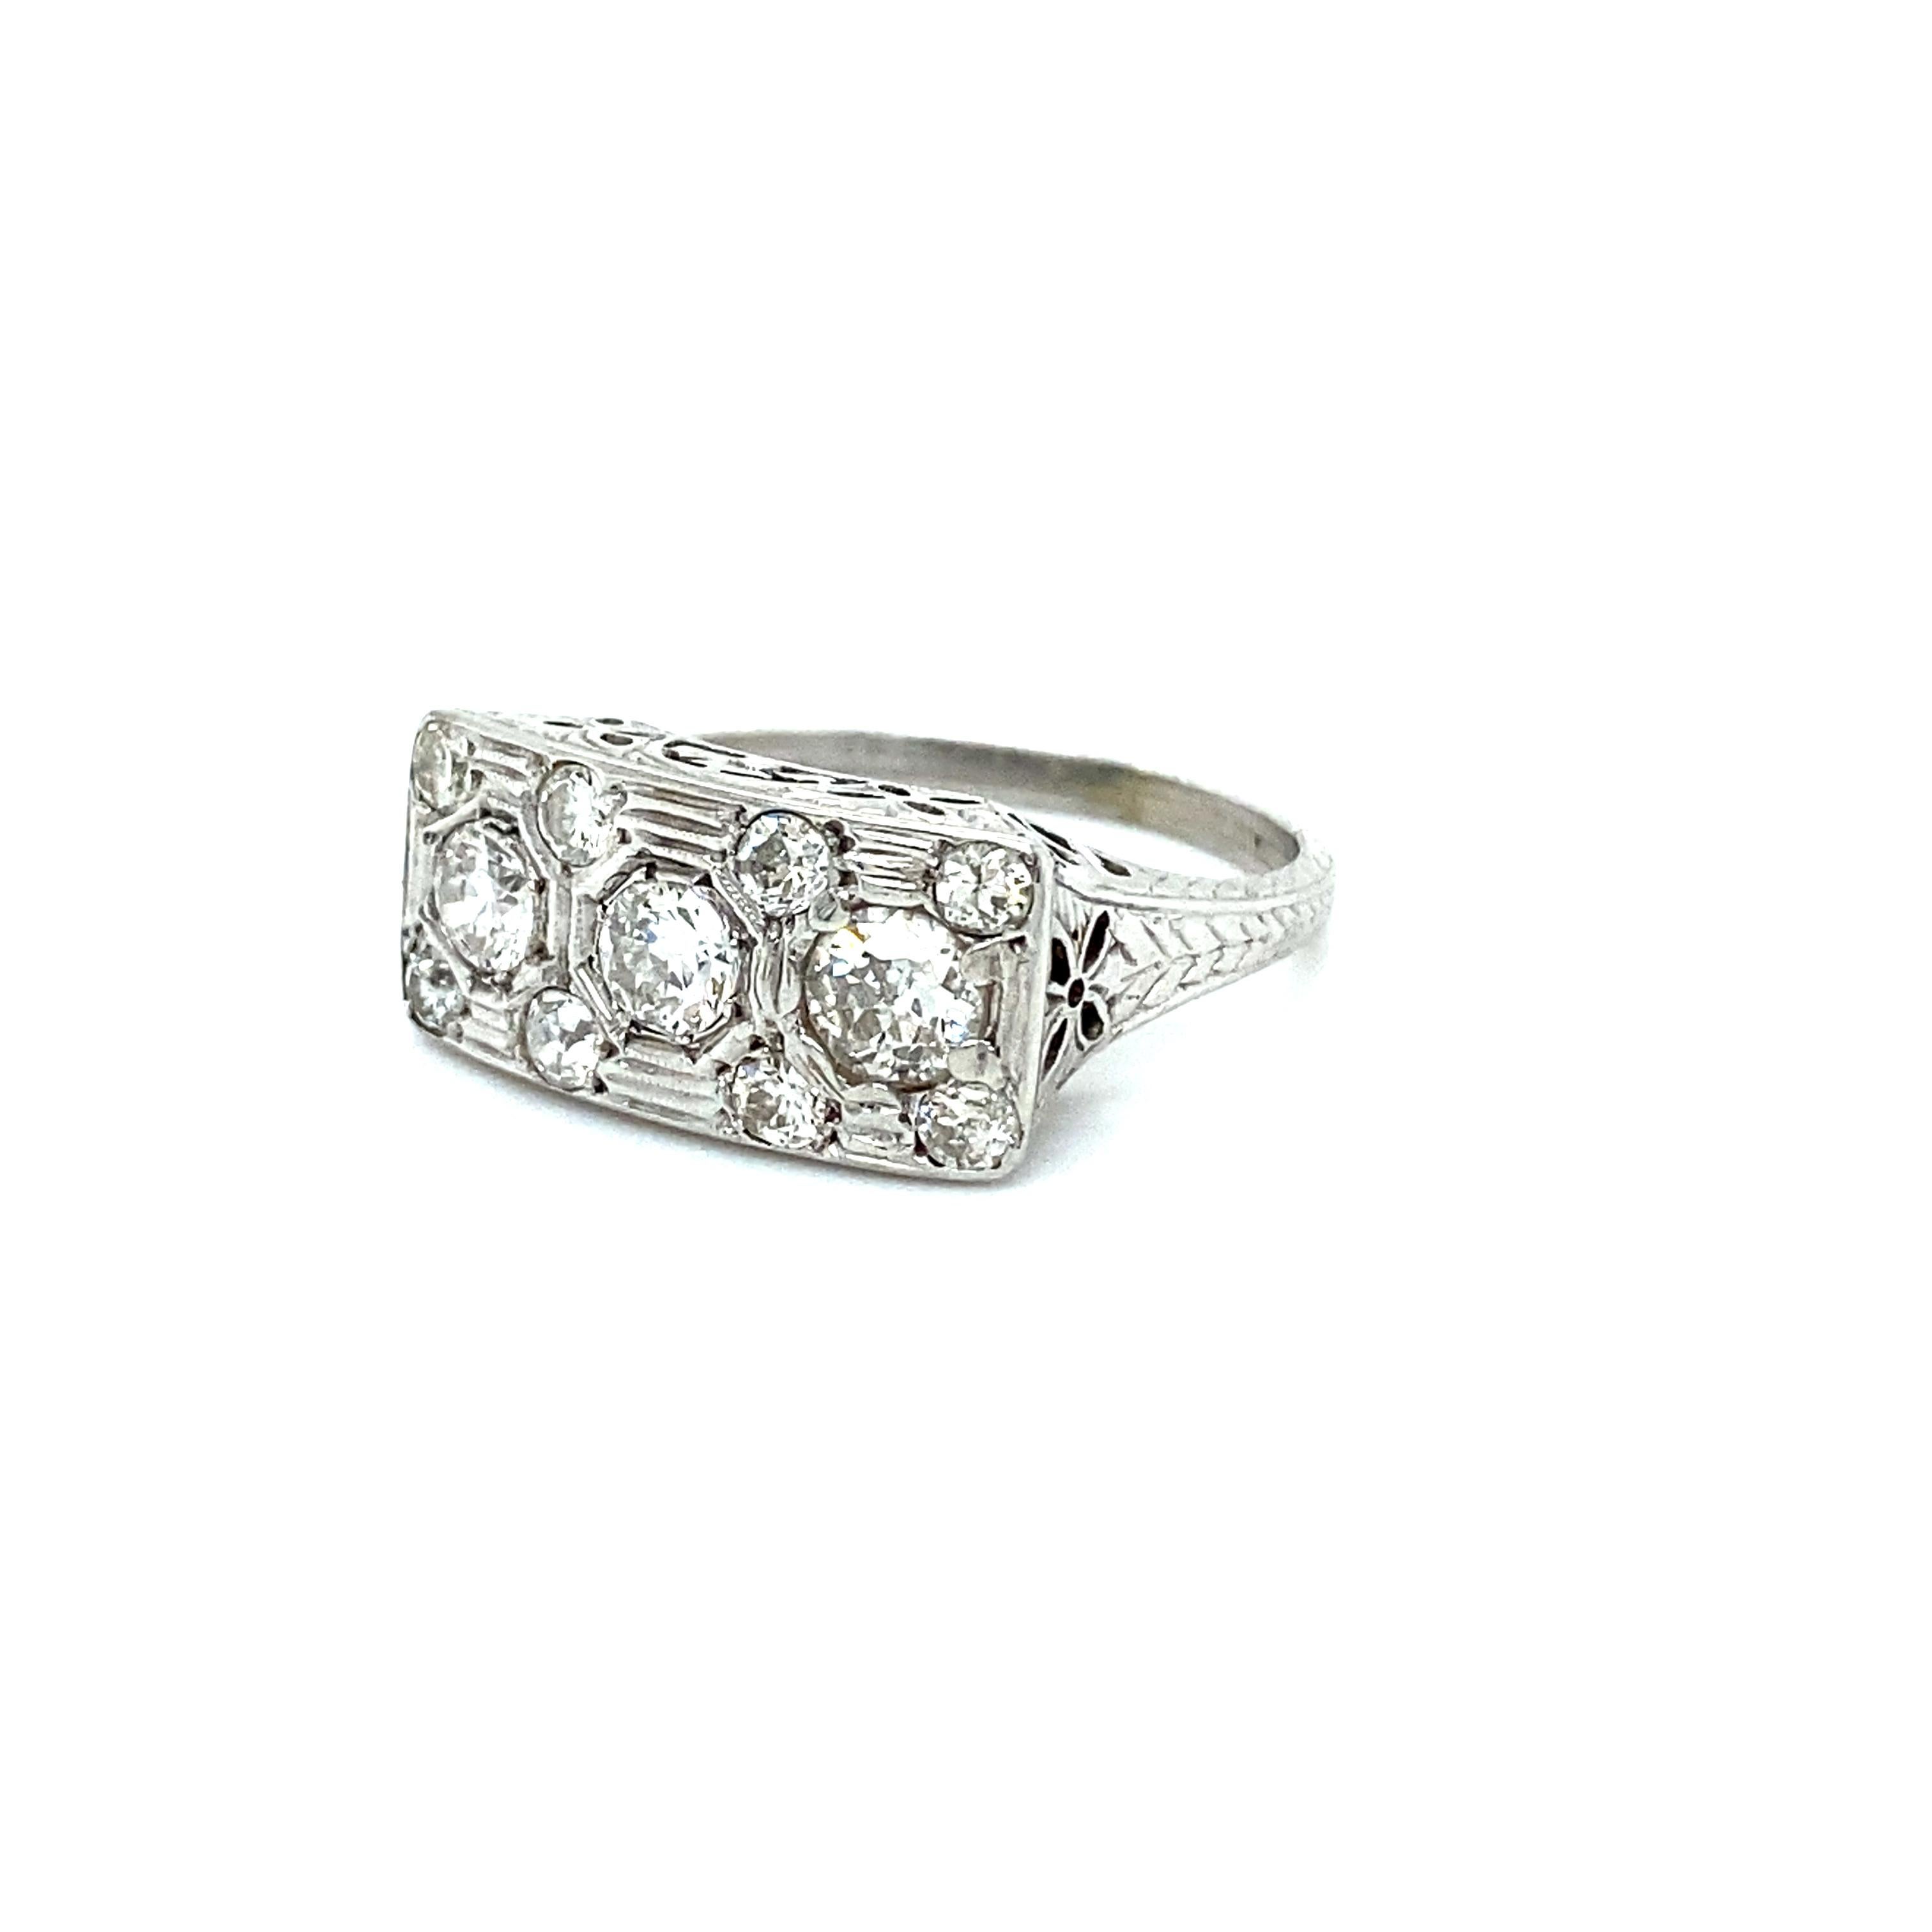 This Vintage Filigree Diamond Cluster Ring Engagement Ring is just gorgeous! Crafted in 18K White Gold, the design features a three stone layout, with additional accent diamonds, and some gorgeous open work filigree! There are a total of 11 Old